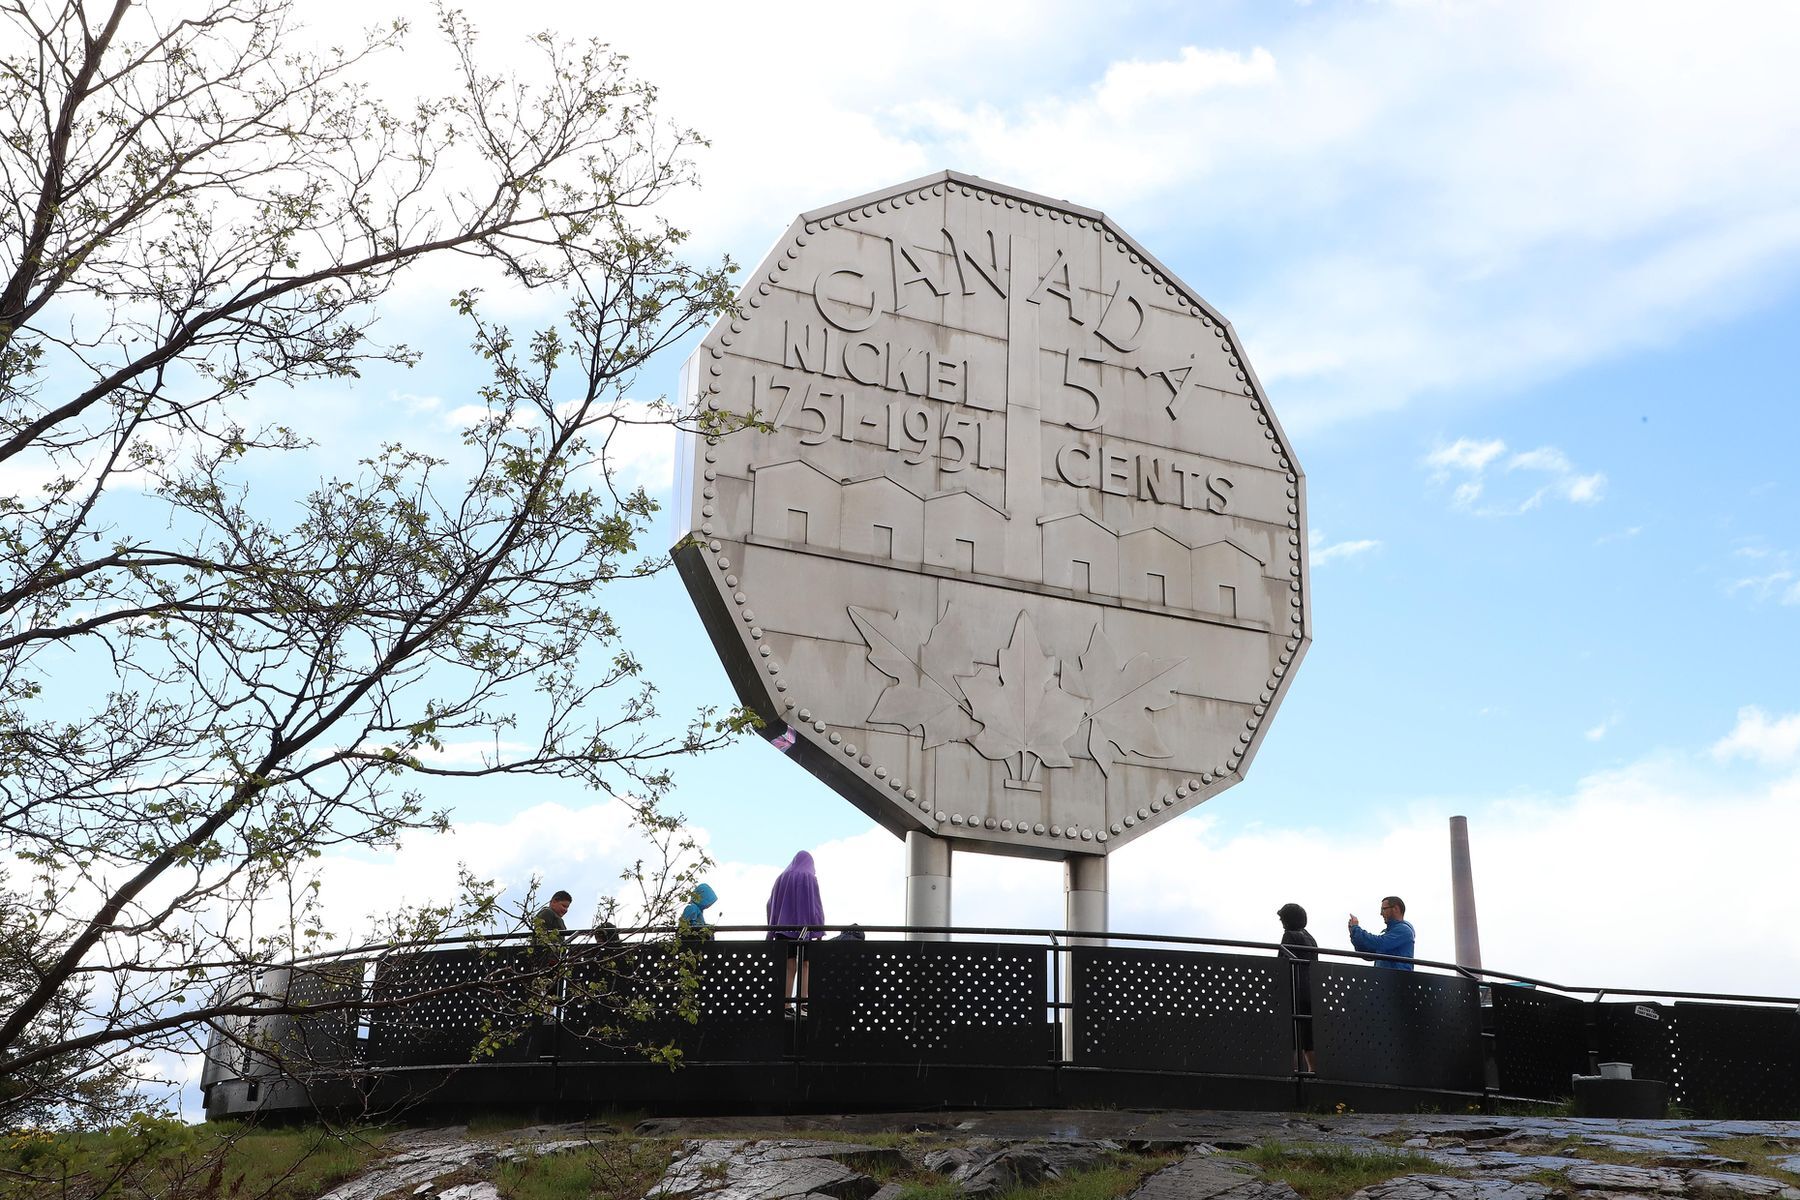 <p>One of the biggest tourist draws to Sudbury is the <a href="https://www.bankofcanadamuseum.ca/2014/11/the-big-nickel/">Big Nickel</a>; at 9 metres (30 feet) high, it is a replica of a 5-cent piece from 1951. If it weren’t for the recent additions of Dynamic Earth and Science North supporting facilities, the Big Nickel might be a tough sell on its own. Make it a proper visit by touring all the facilities and getting to know the rich history of Canada’s mint and this celebrated mining region. </p>